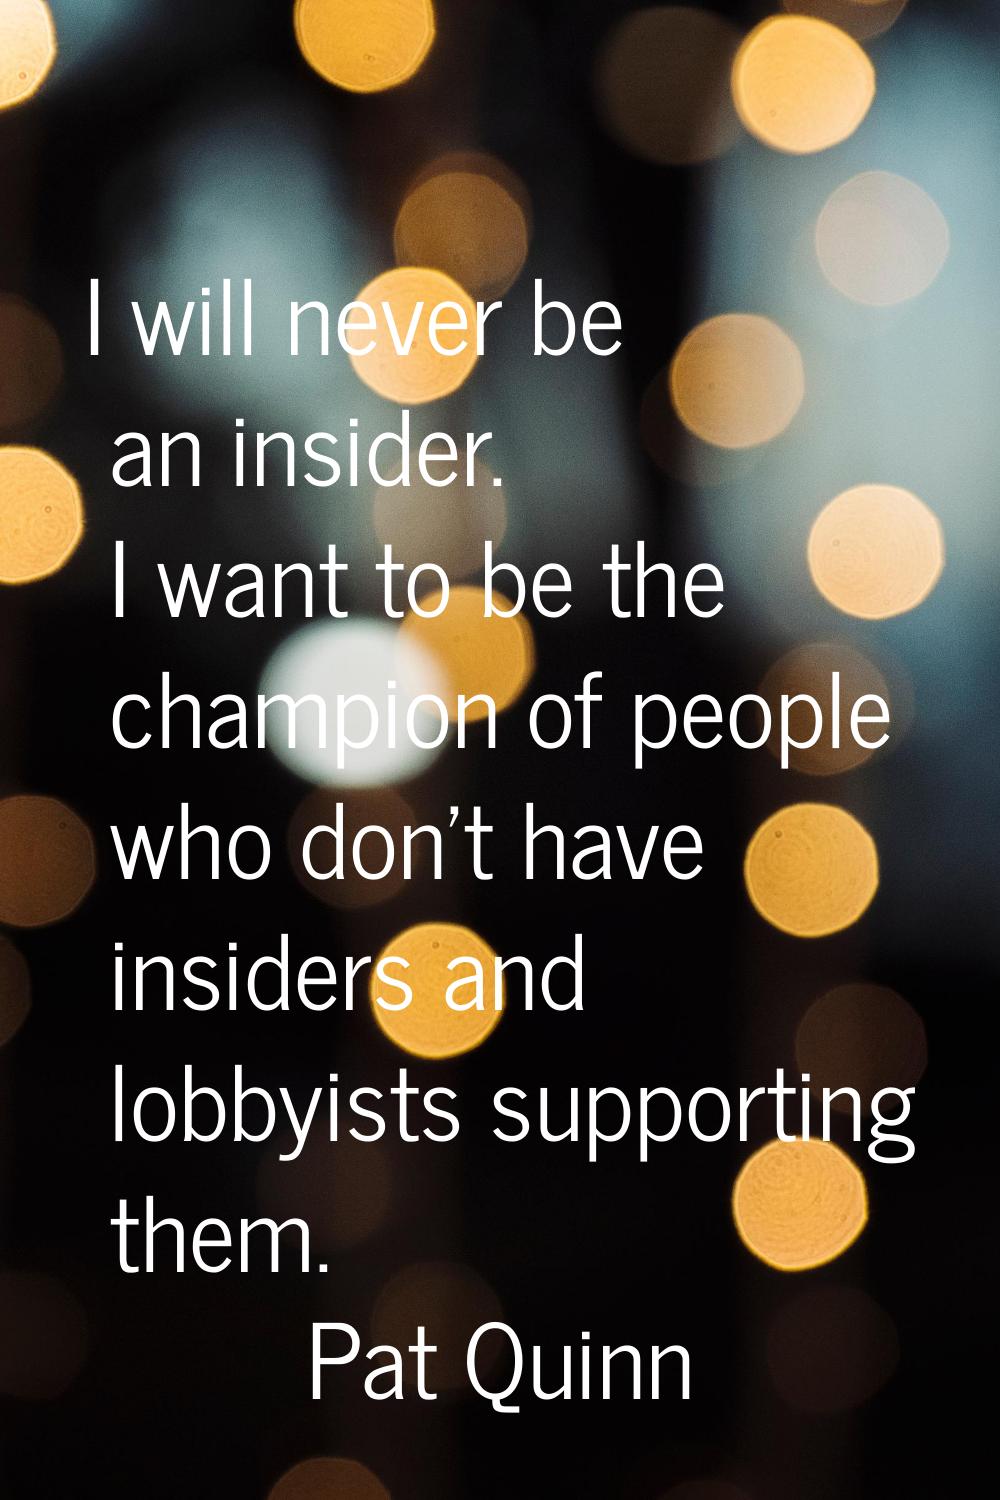 I will never be an insider. I want to be the champion of people who don't have insiders and lobbyis